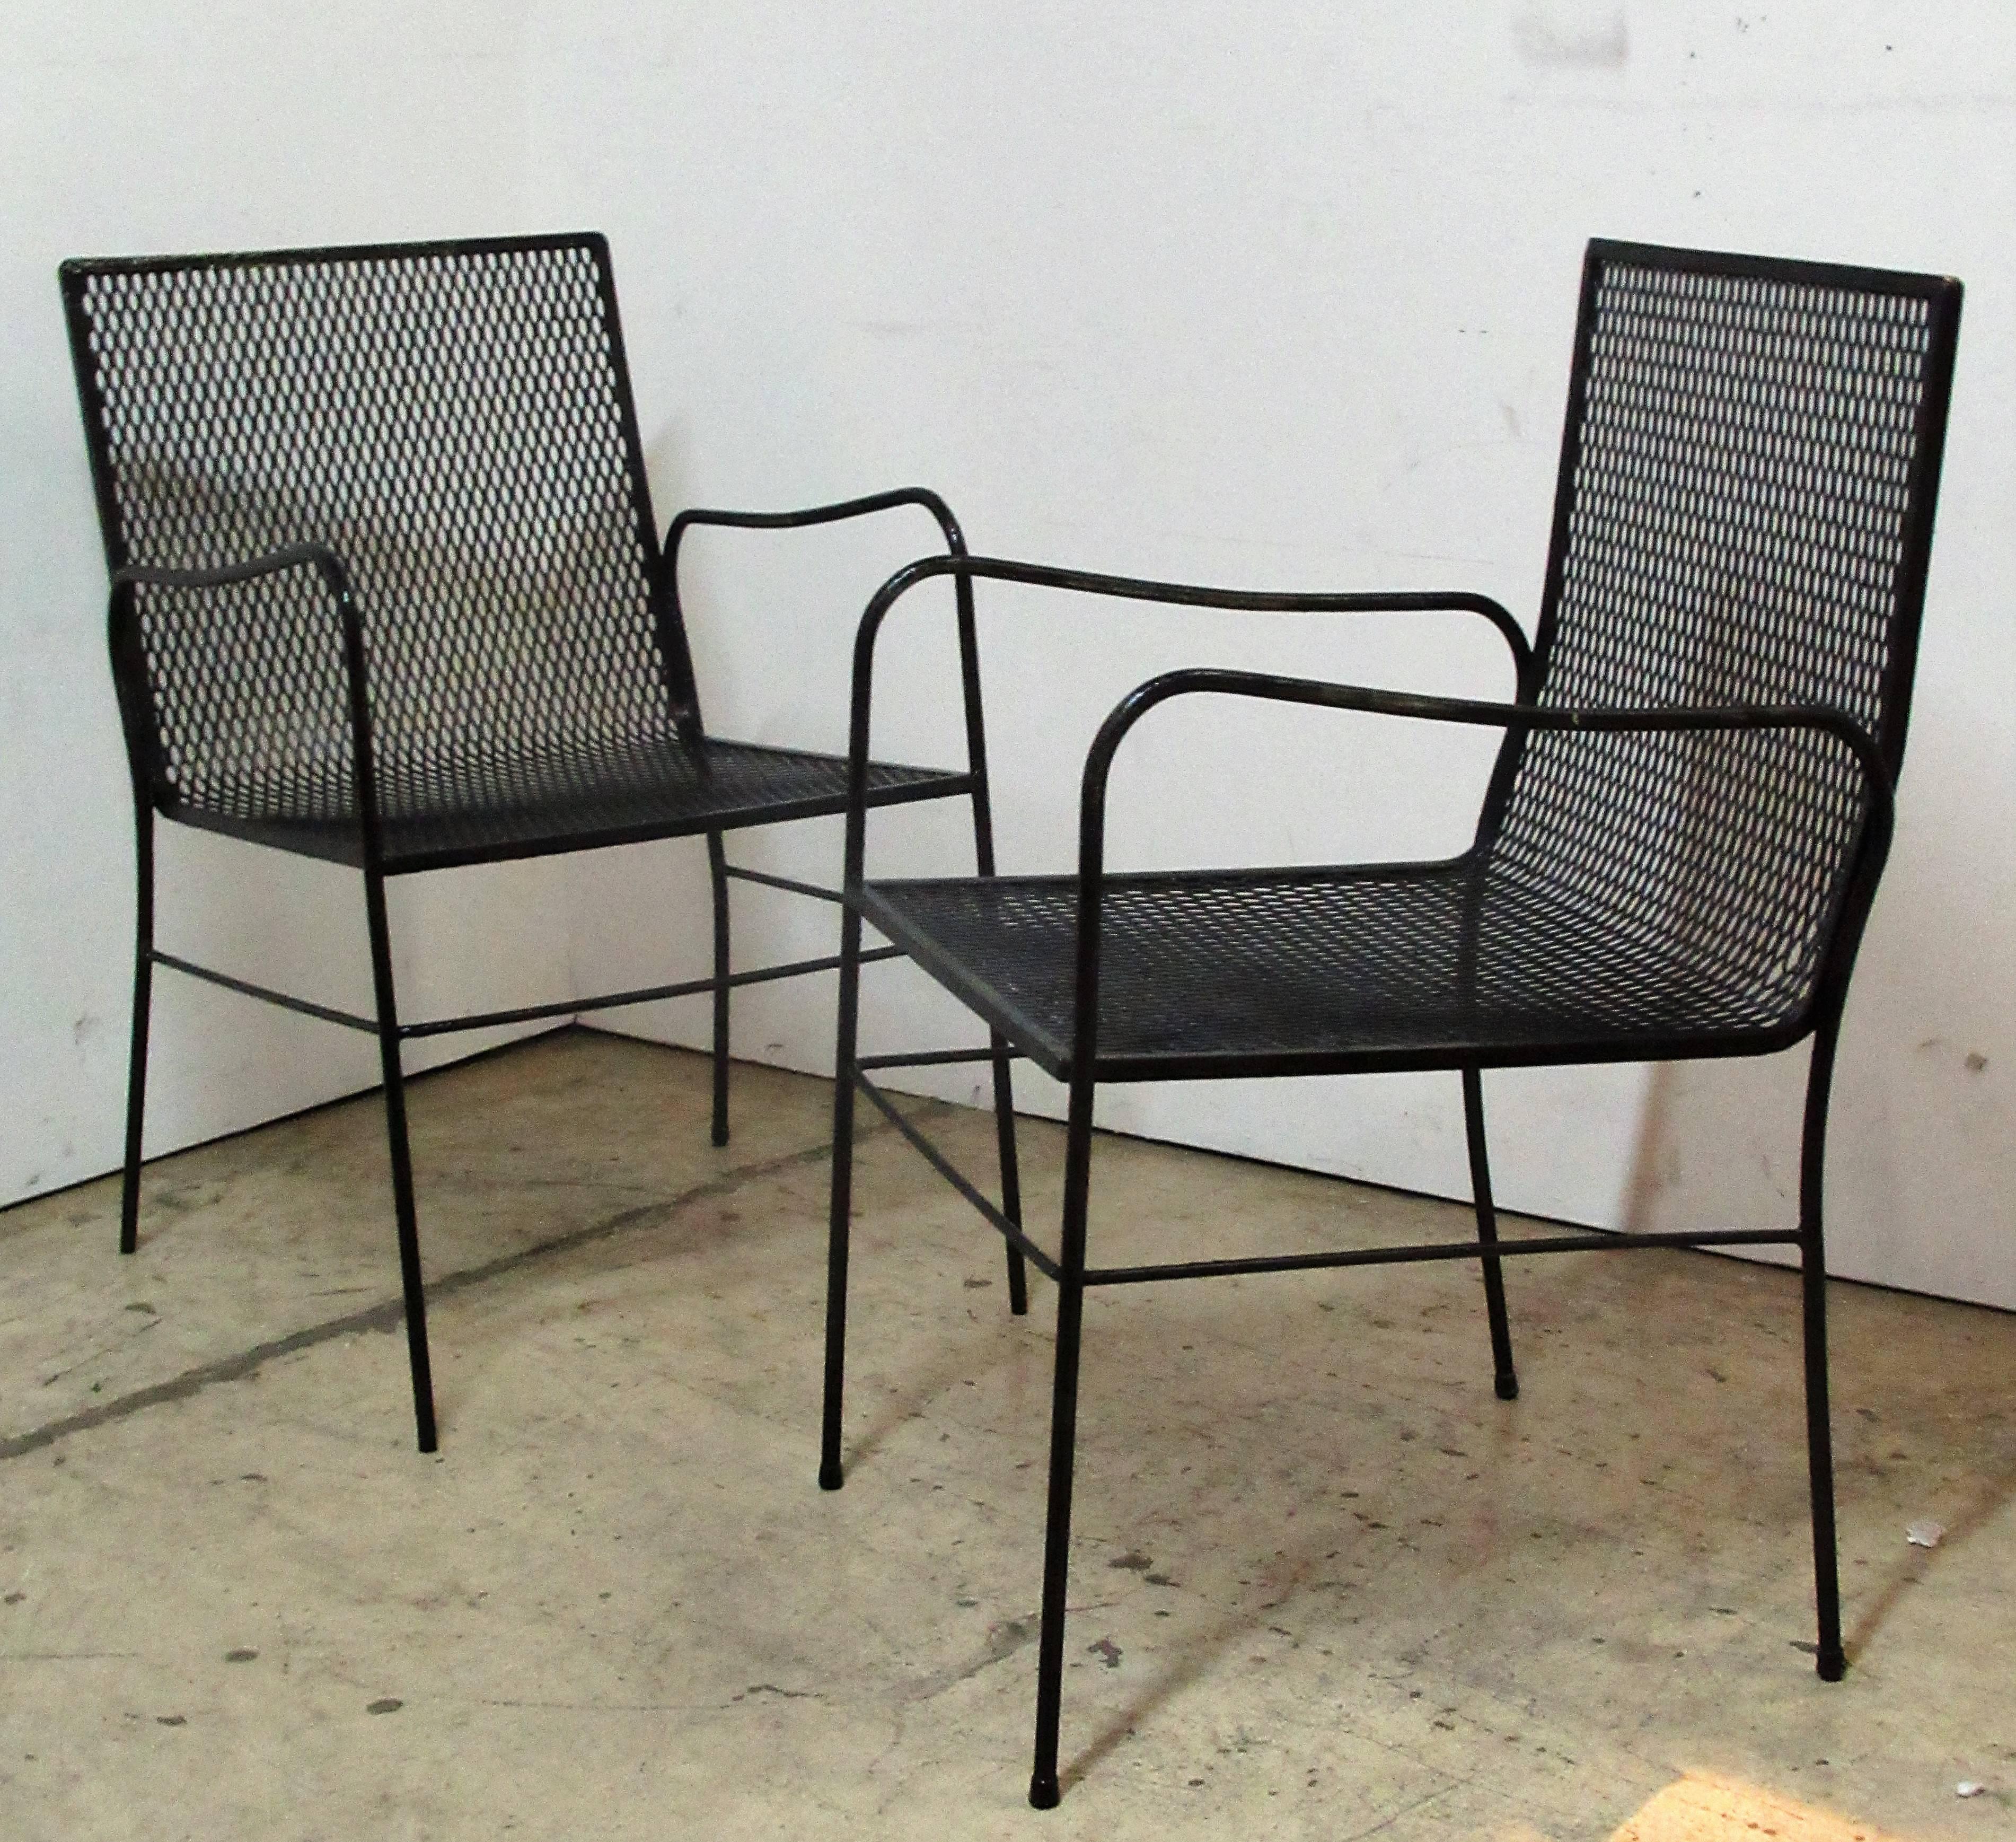  Wrought Iron Mesh Patio Set in the style of Mathieu Mategot 1